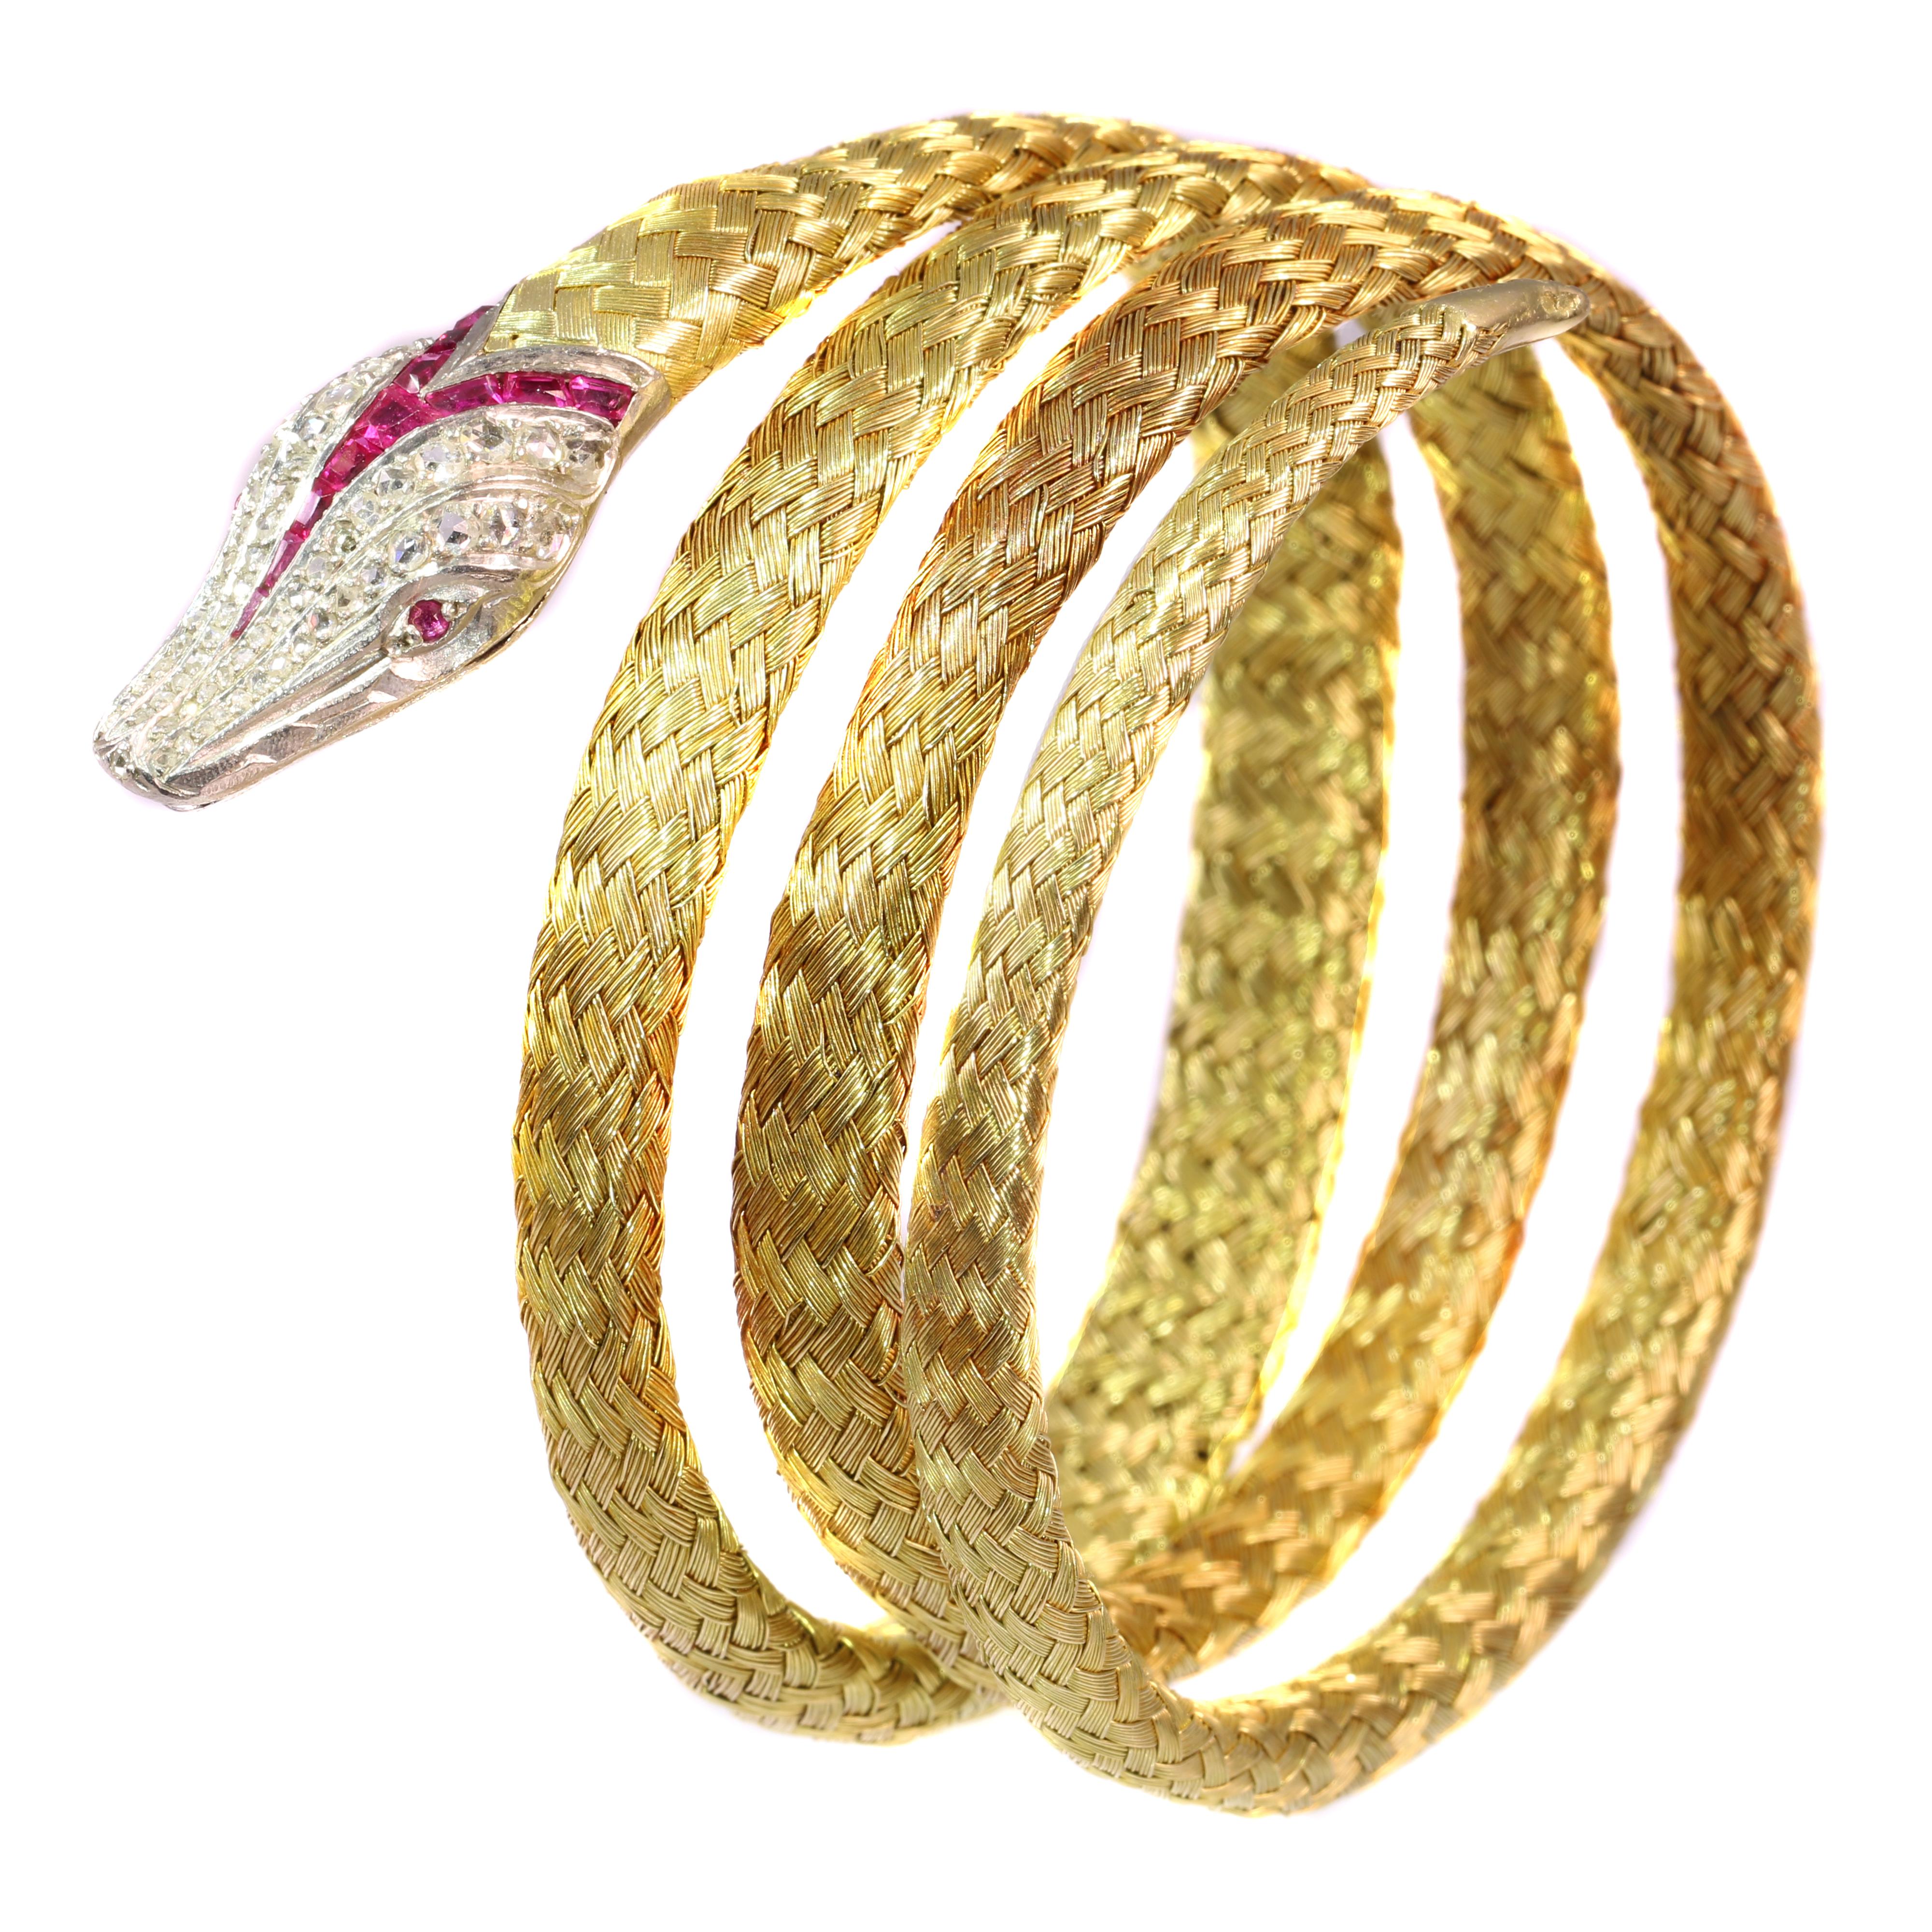 Late Victorian French Gold and Platinum Snake Bracelet with Diamonds and Rubies